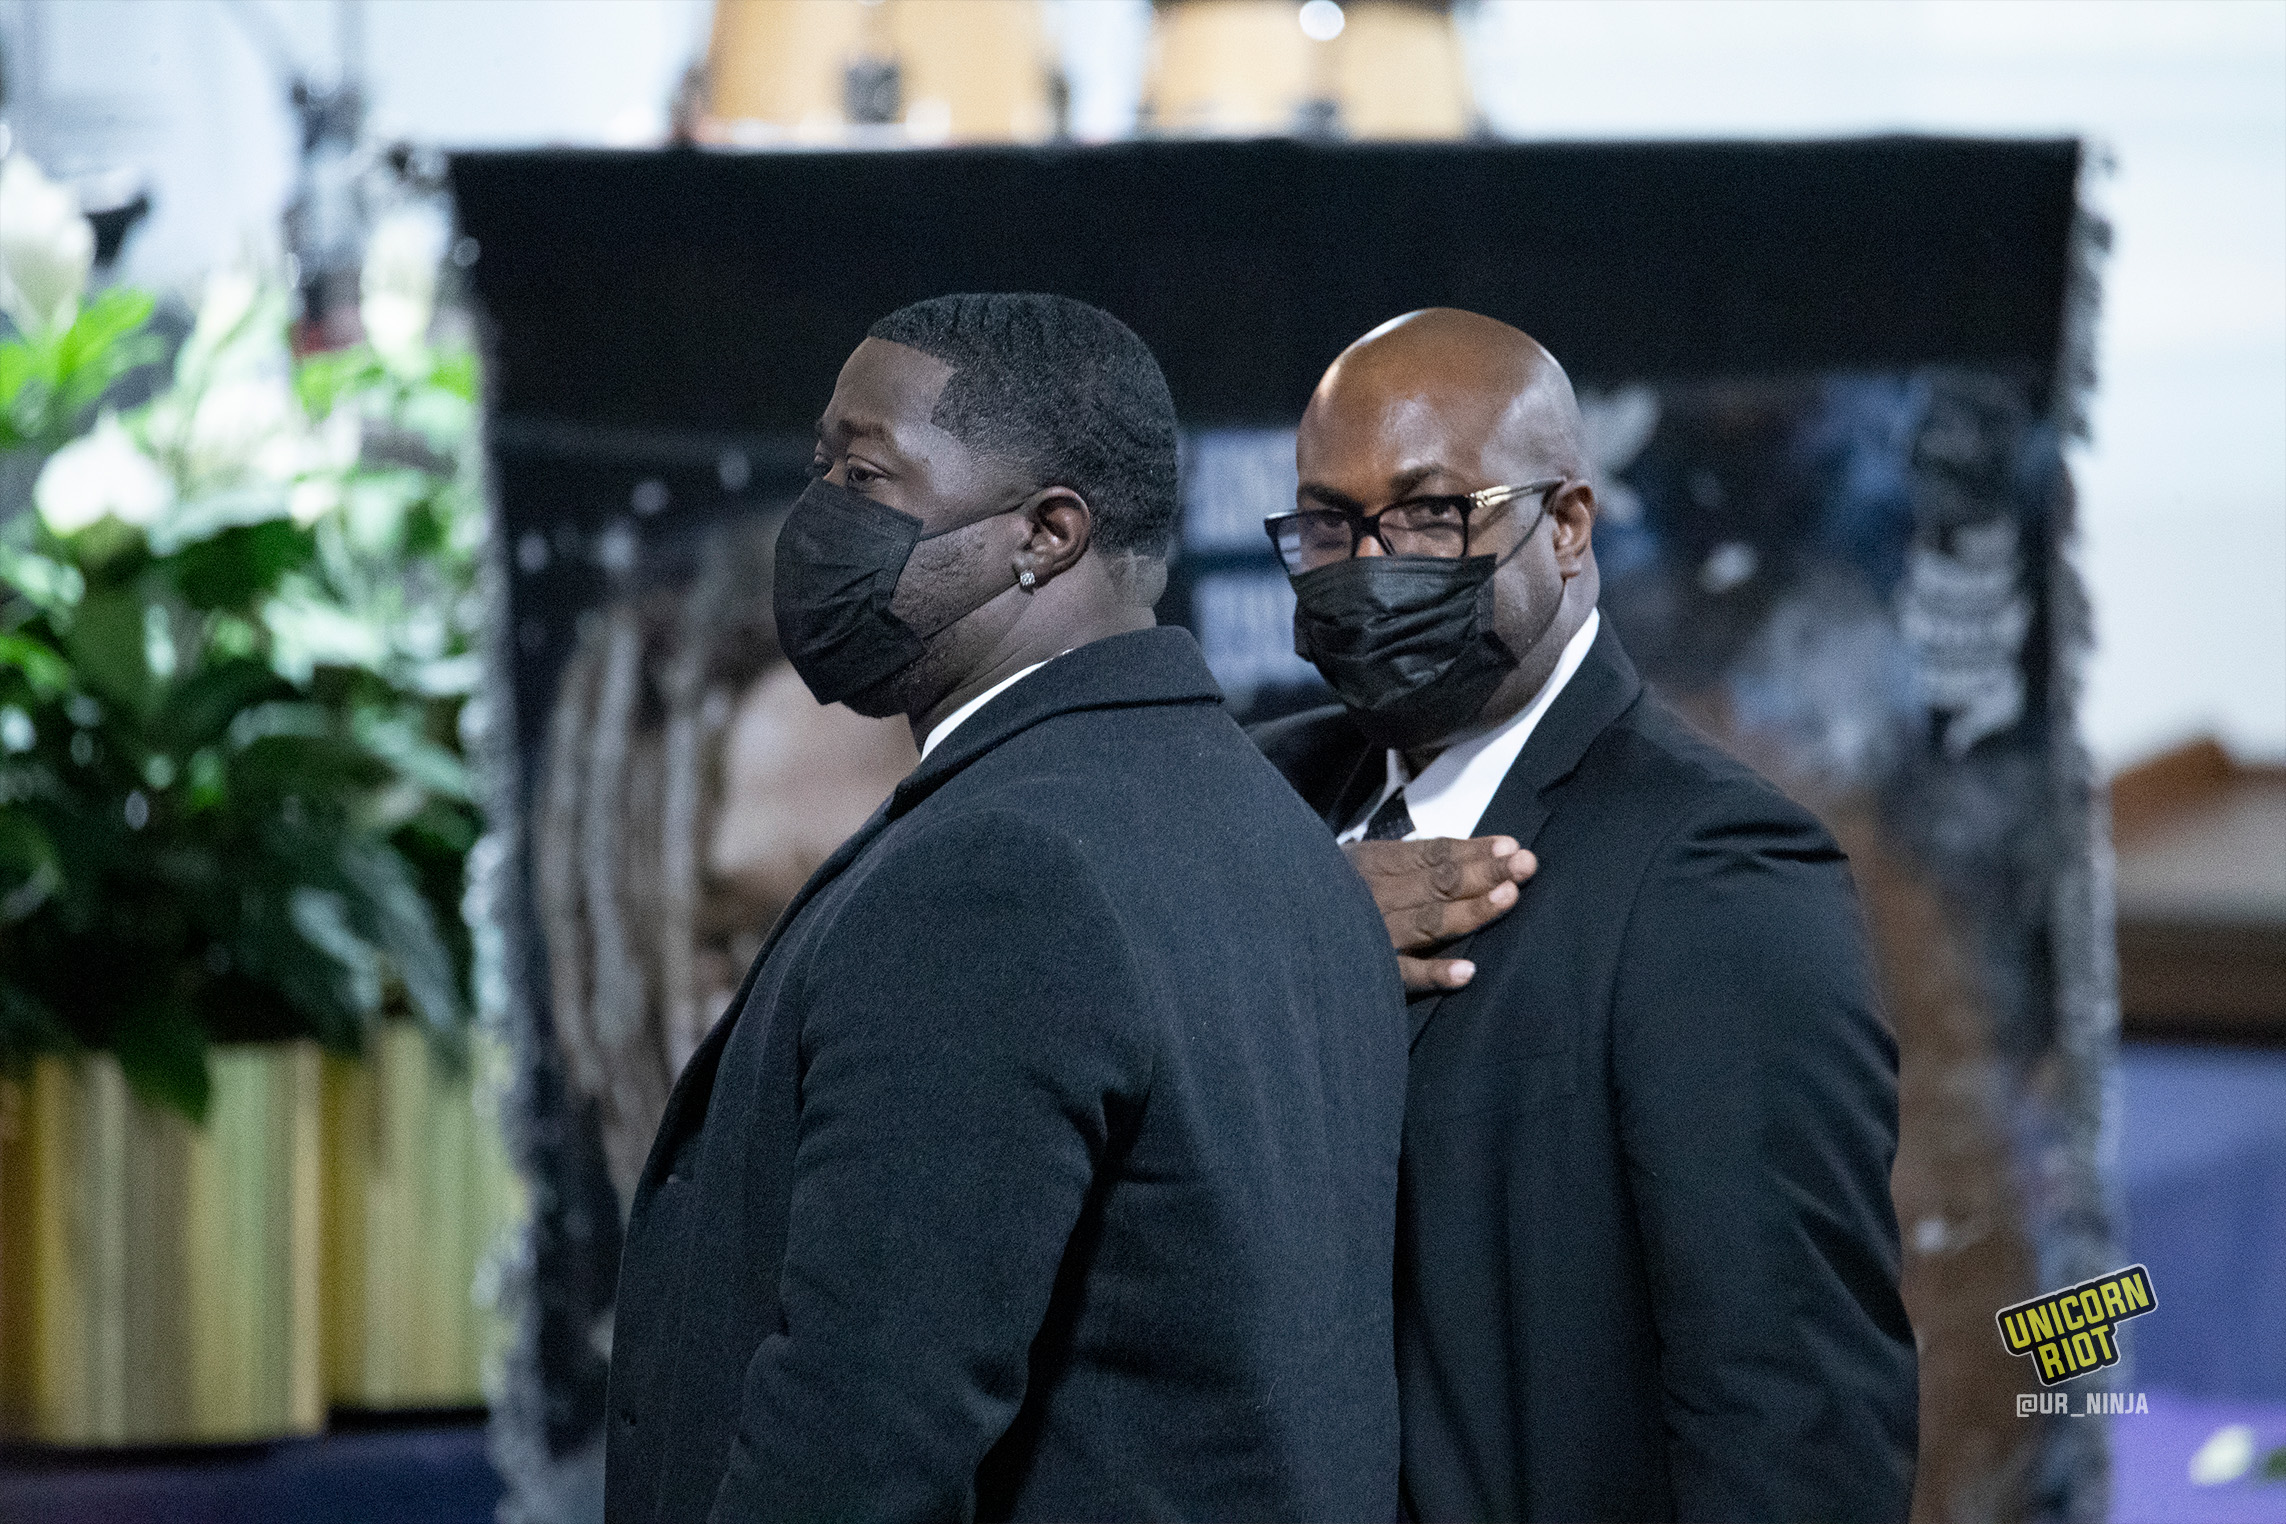 February 17, 2022, Minneapolis, MN: Philonise Floyd, the brother of George Floyd (right) and Brandon Williams, George Floyd's nephew stand up when recognized by the speaker at Amir Lockes funeral.